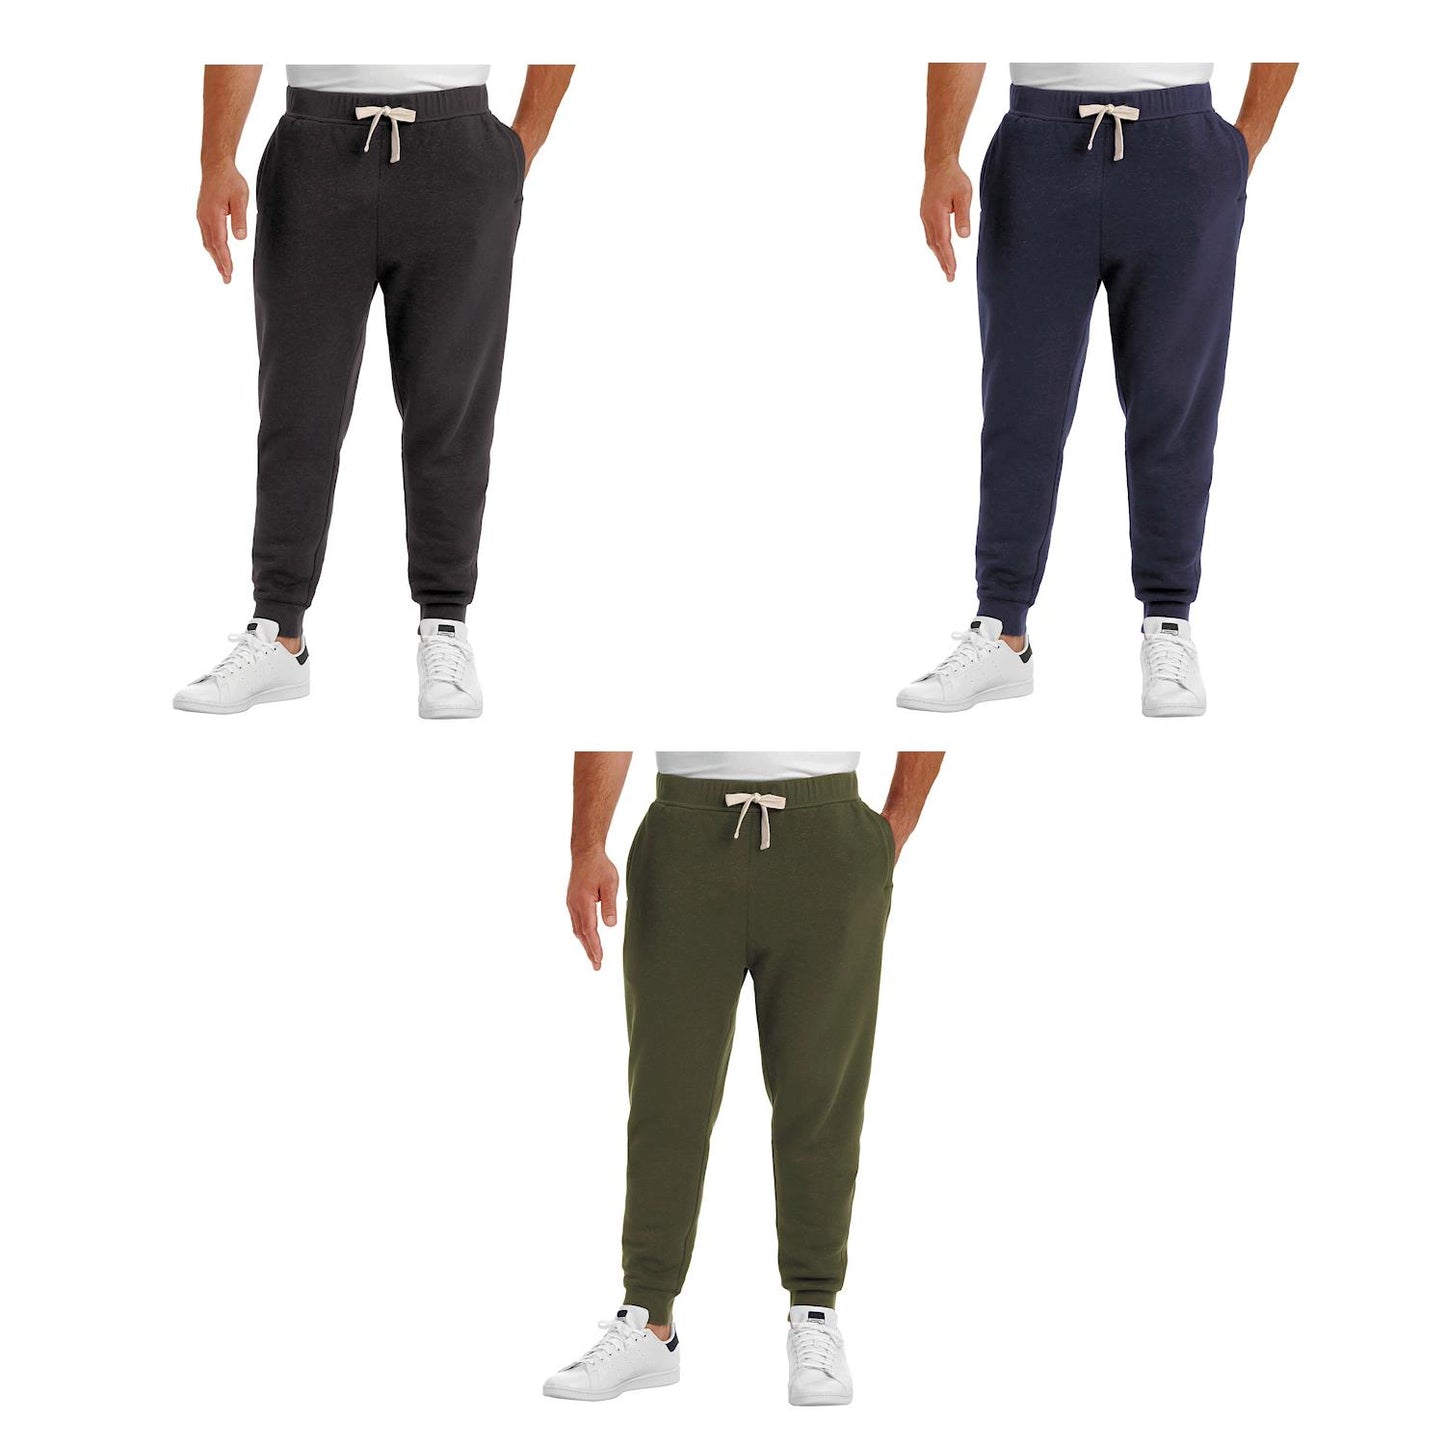 Men's Stretch Newport Warm and Comfortable Jogger Choose Color Size